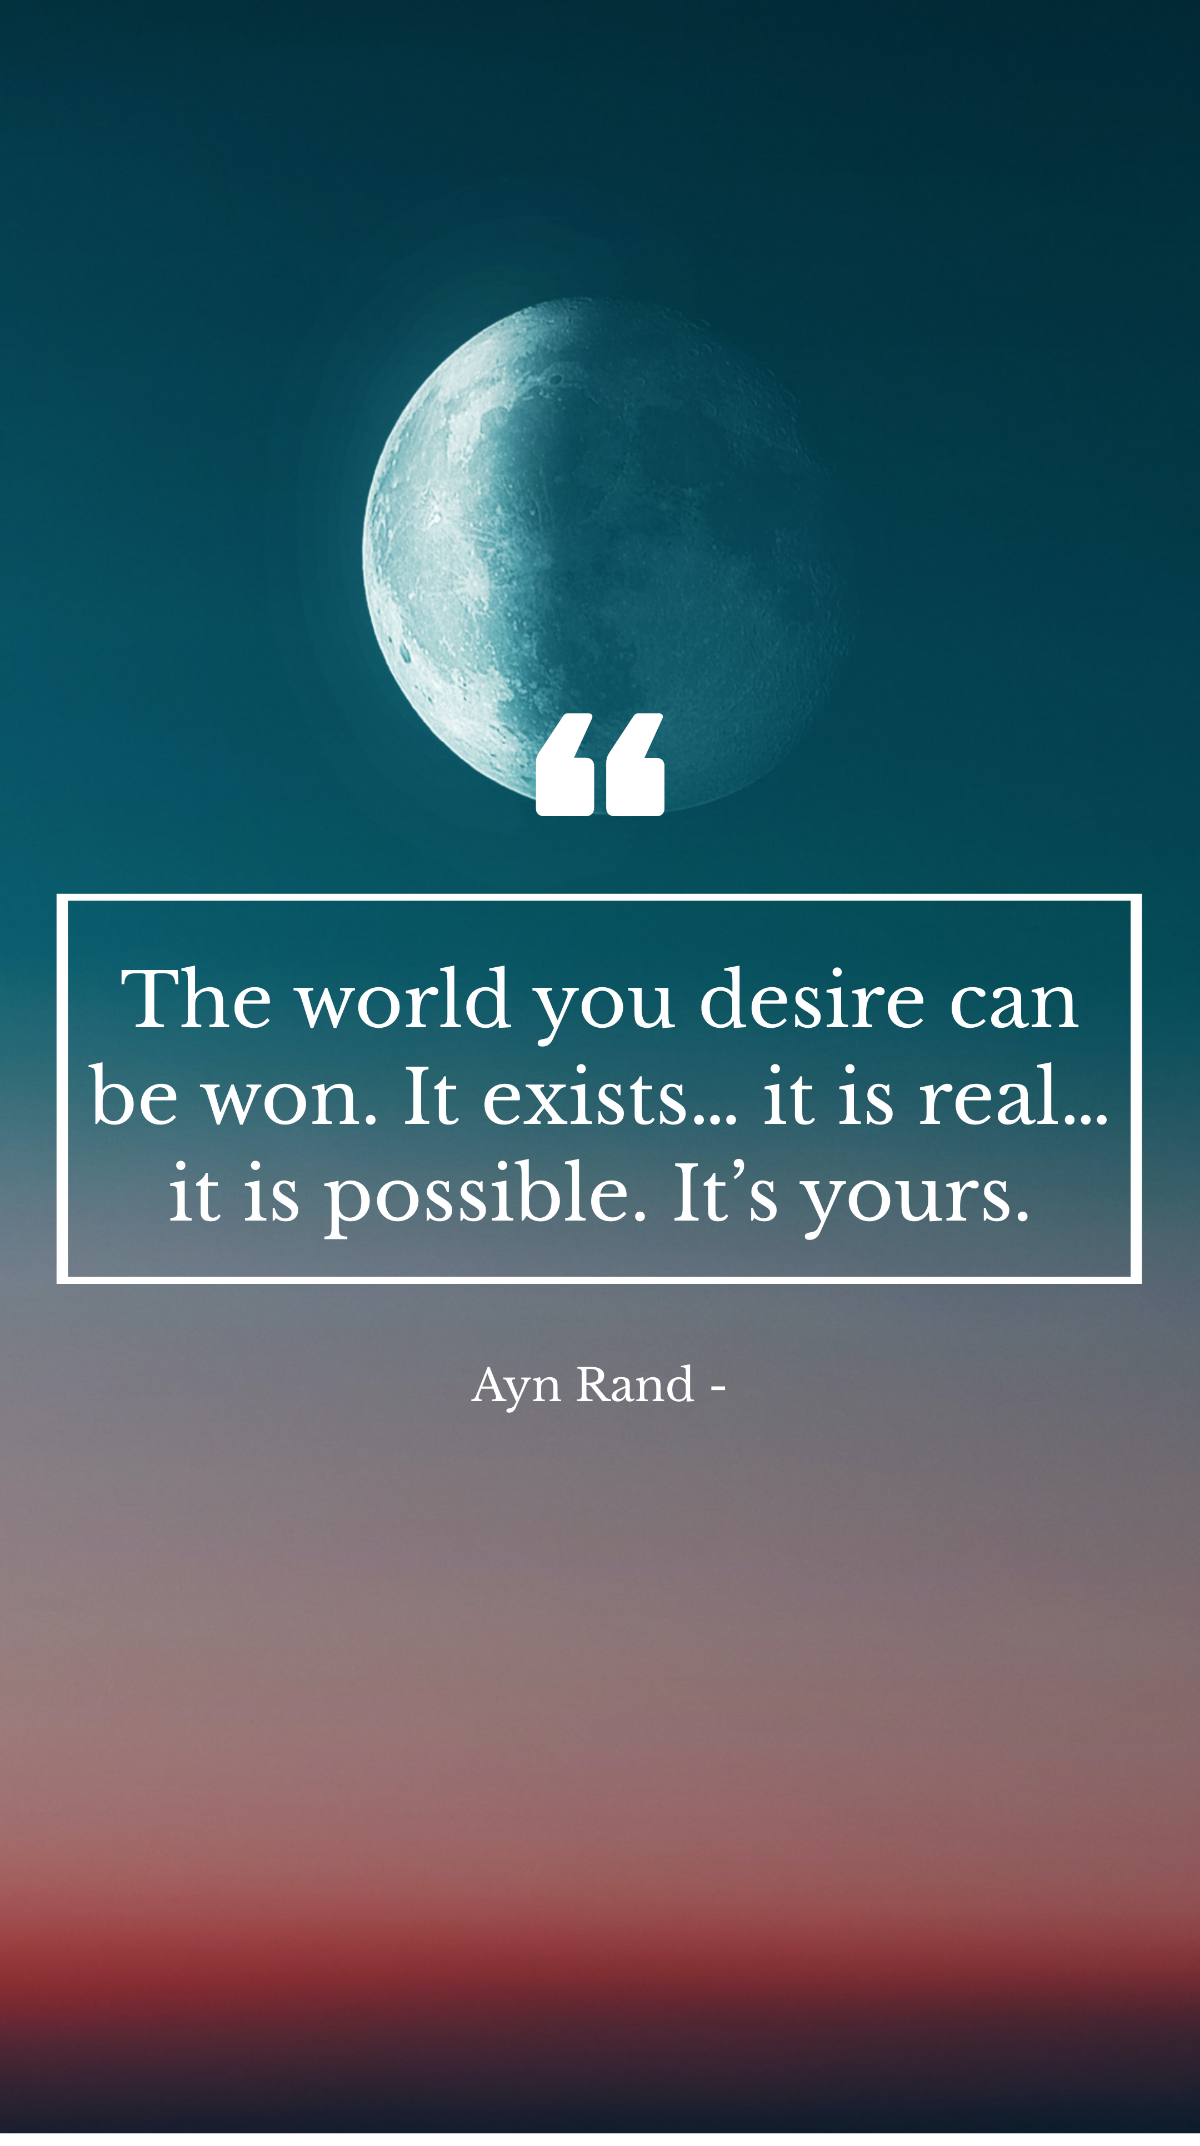 Ayn Rand - The world you desire can be won. It exists… it is real… it is possible. It’s yours. Template